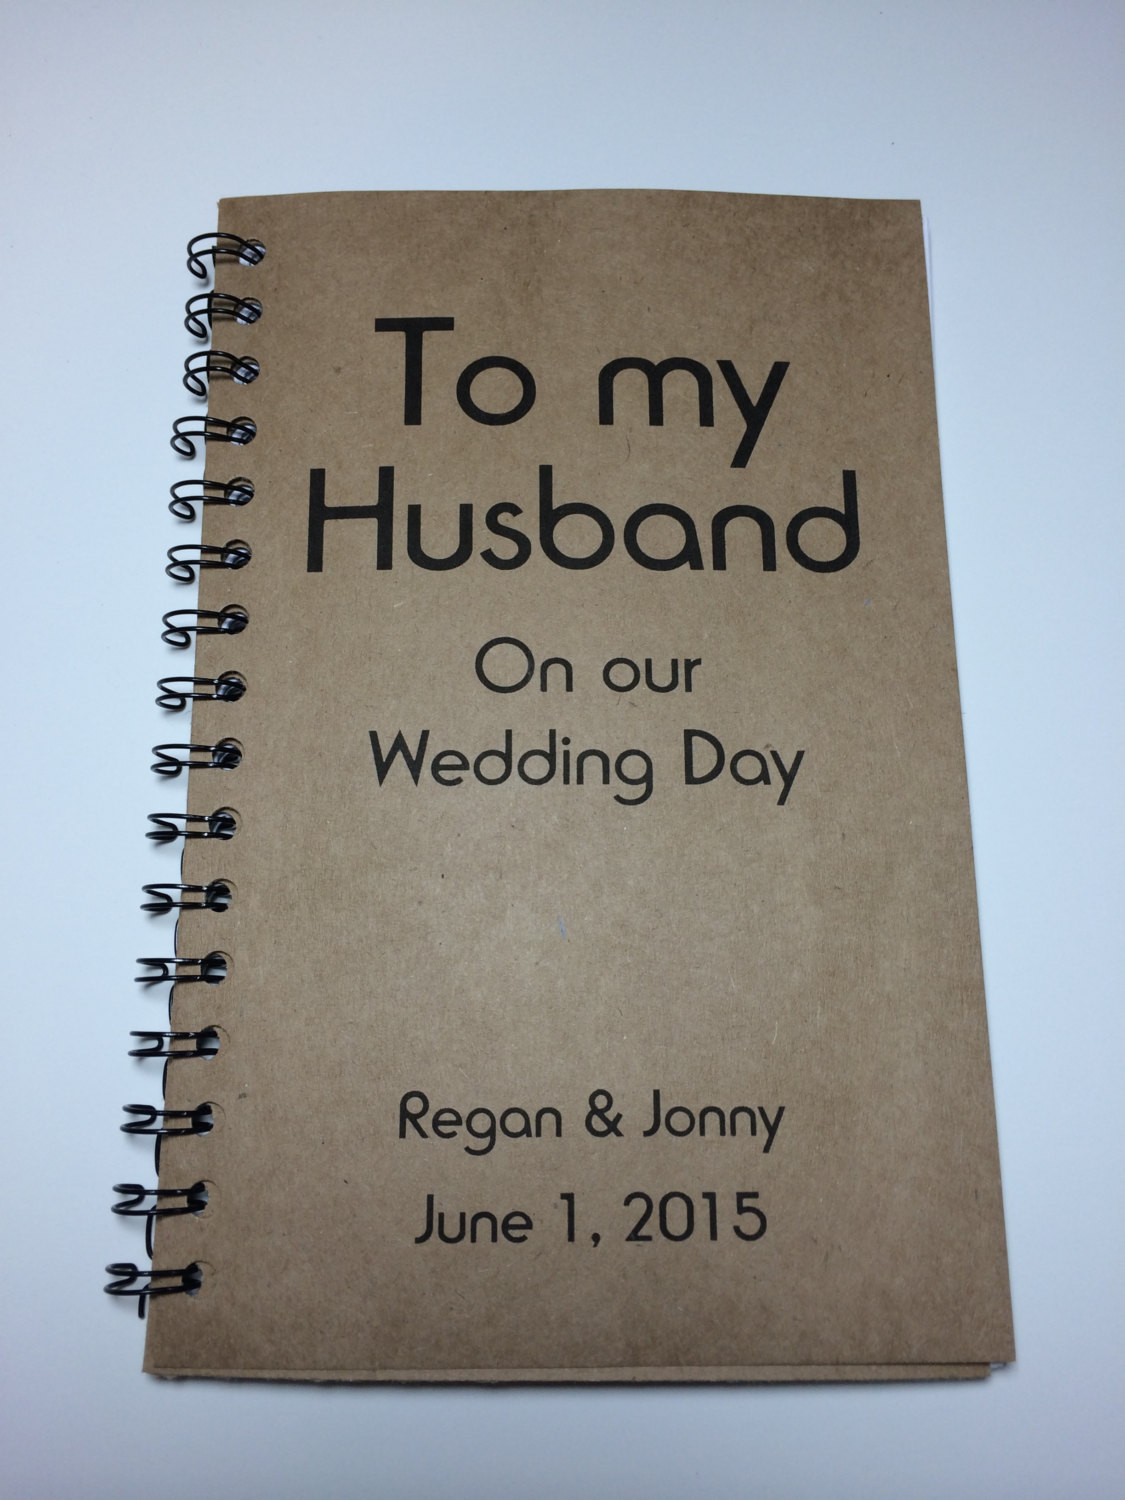 Wedding Gift Ideas For Husband
 To my Husband on our Wedding Day Journal Notebook